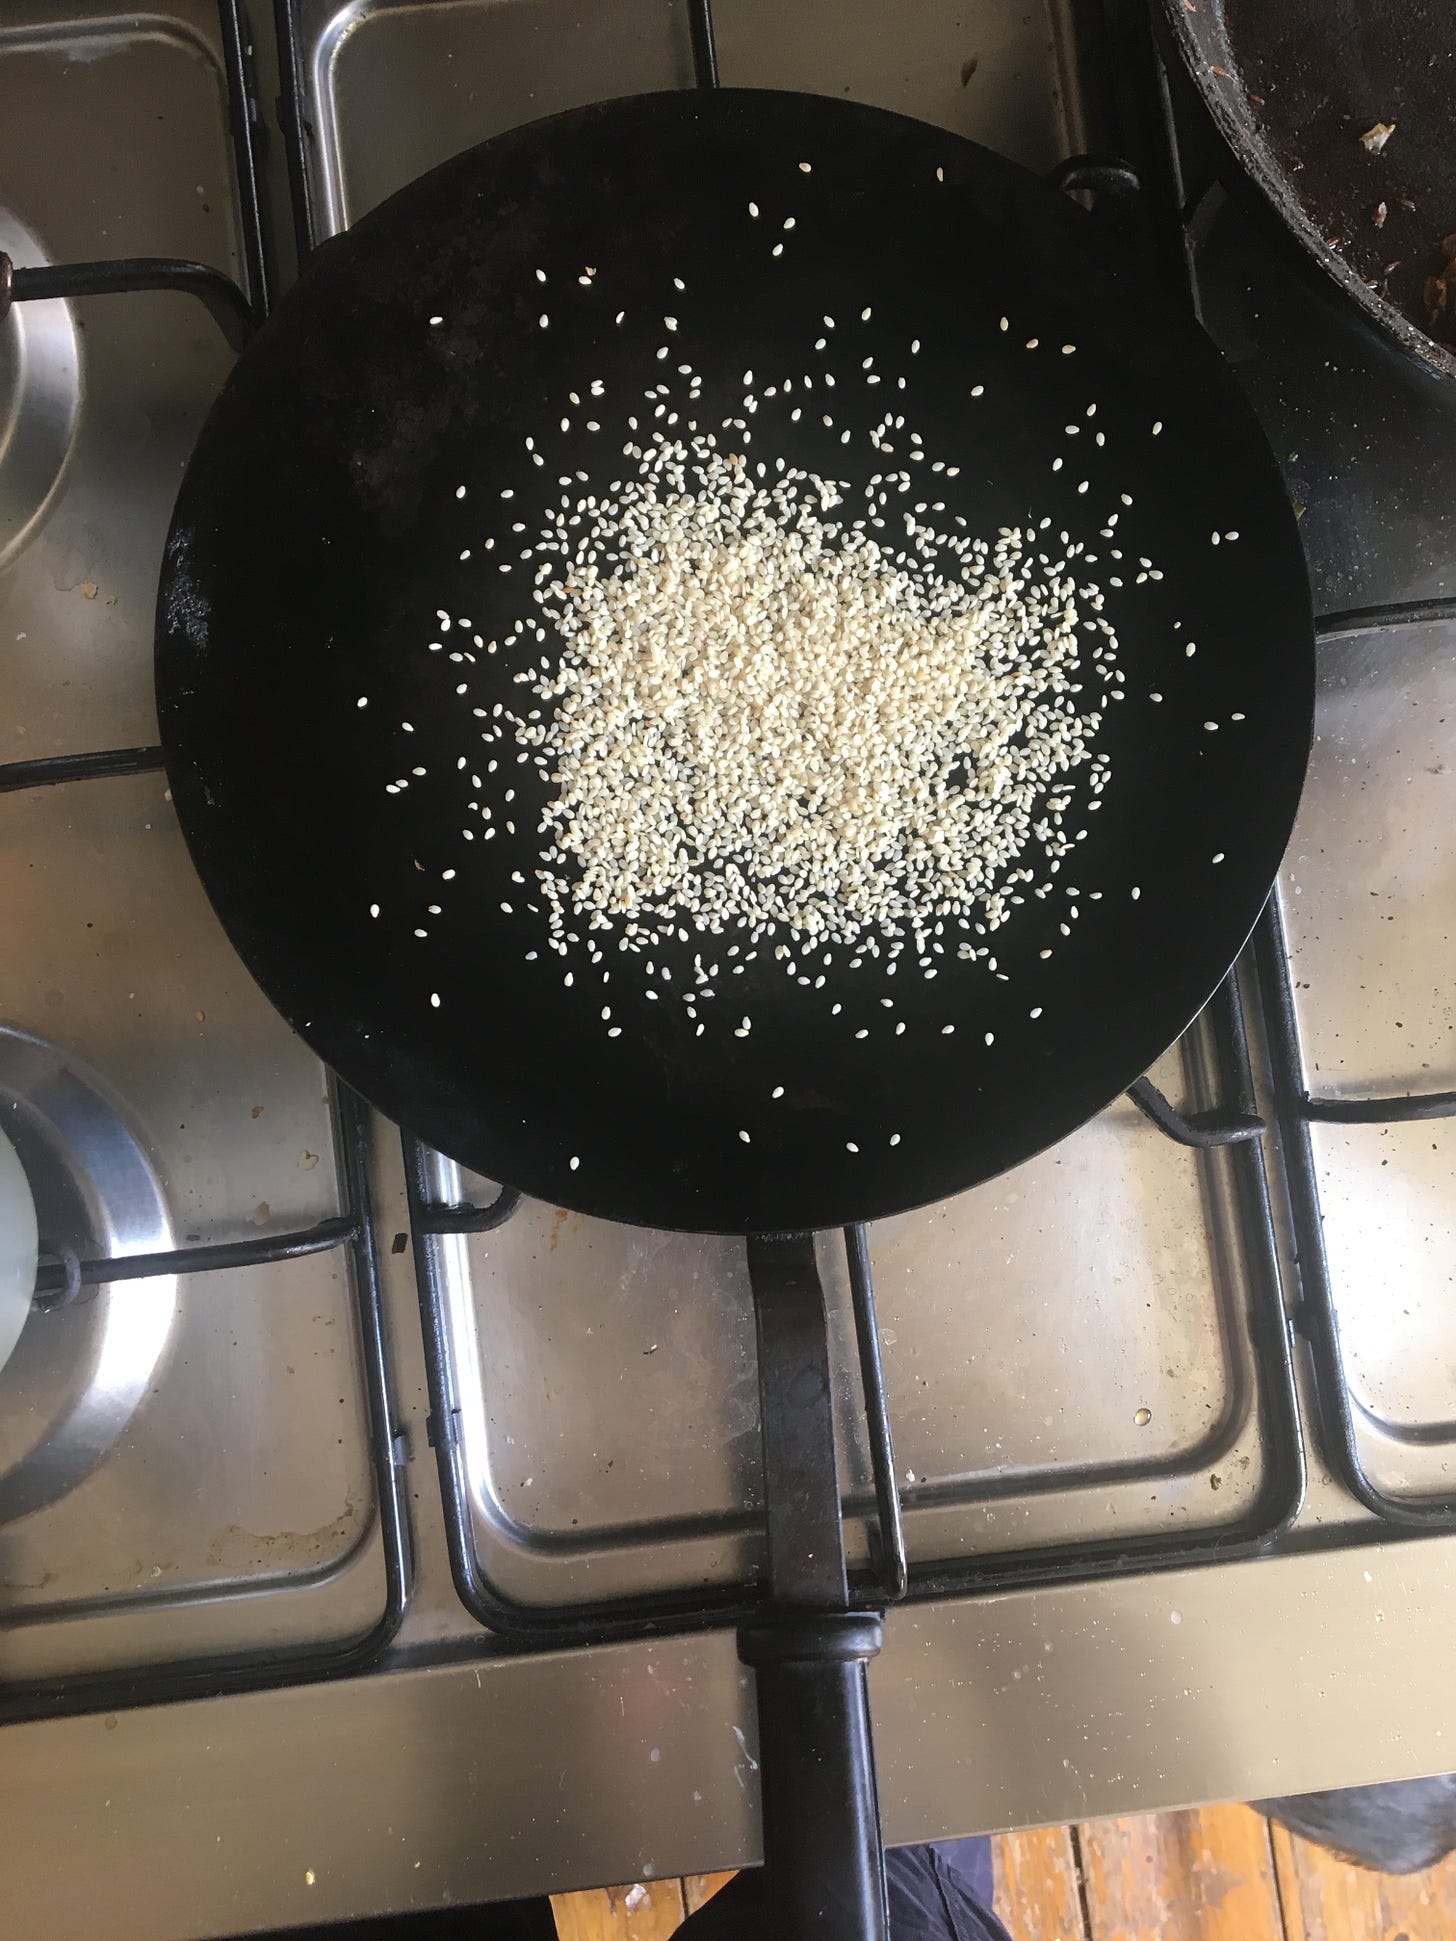 A flat round iron pan photographed from above, on a semi-clean metal gas hob, on which are toasting a pile of pale sesame seeds. The pan has a long dark handle that is in the foreground. 